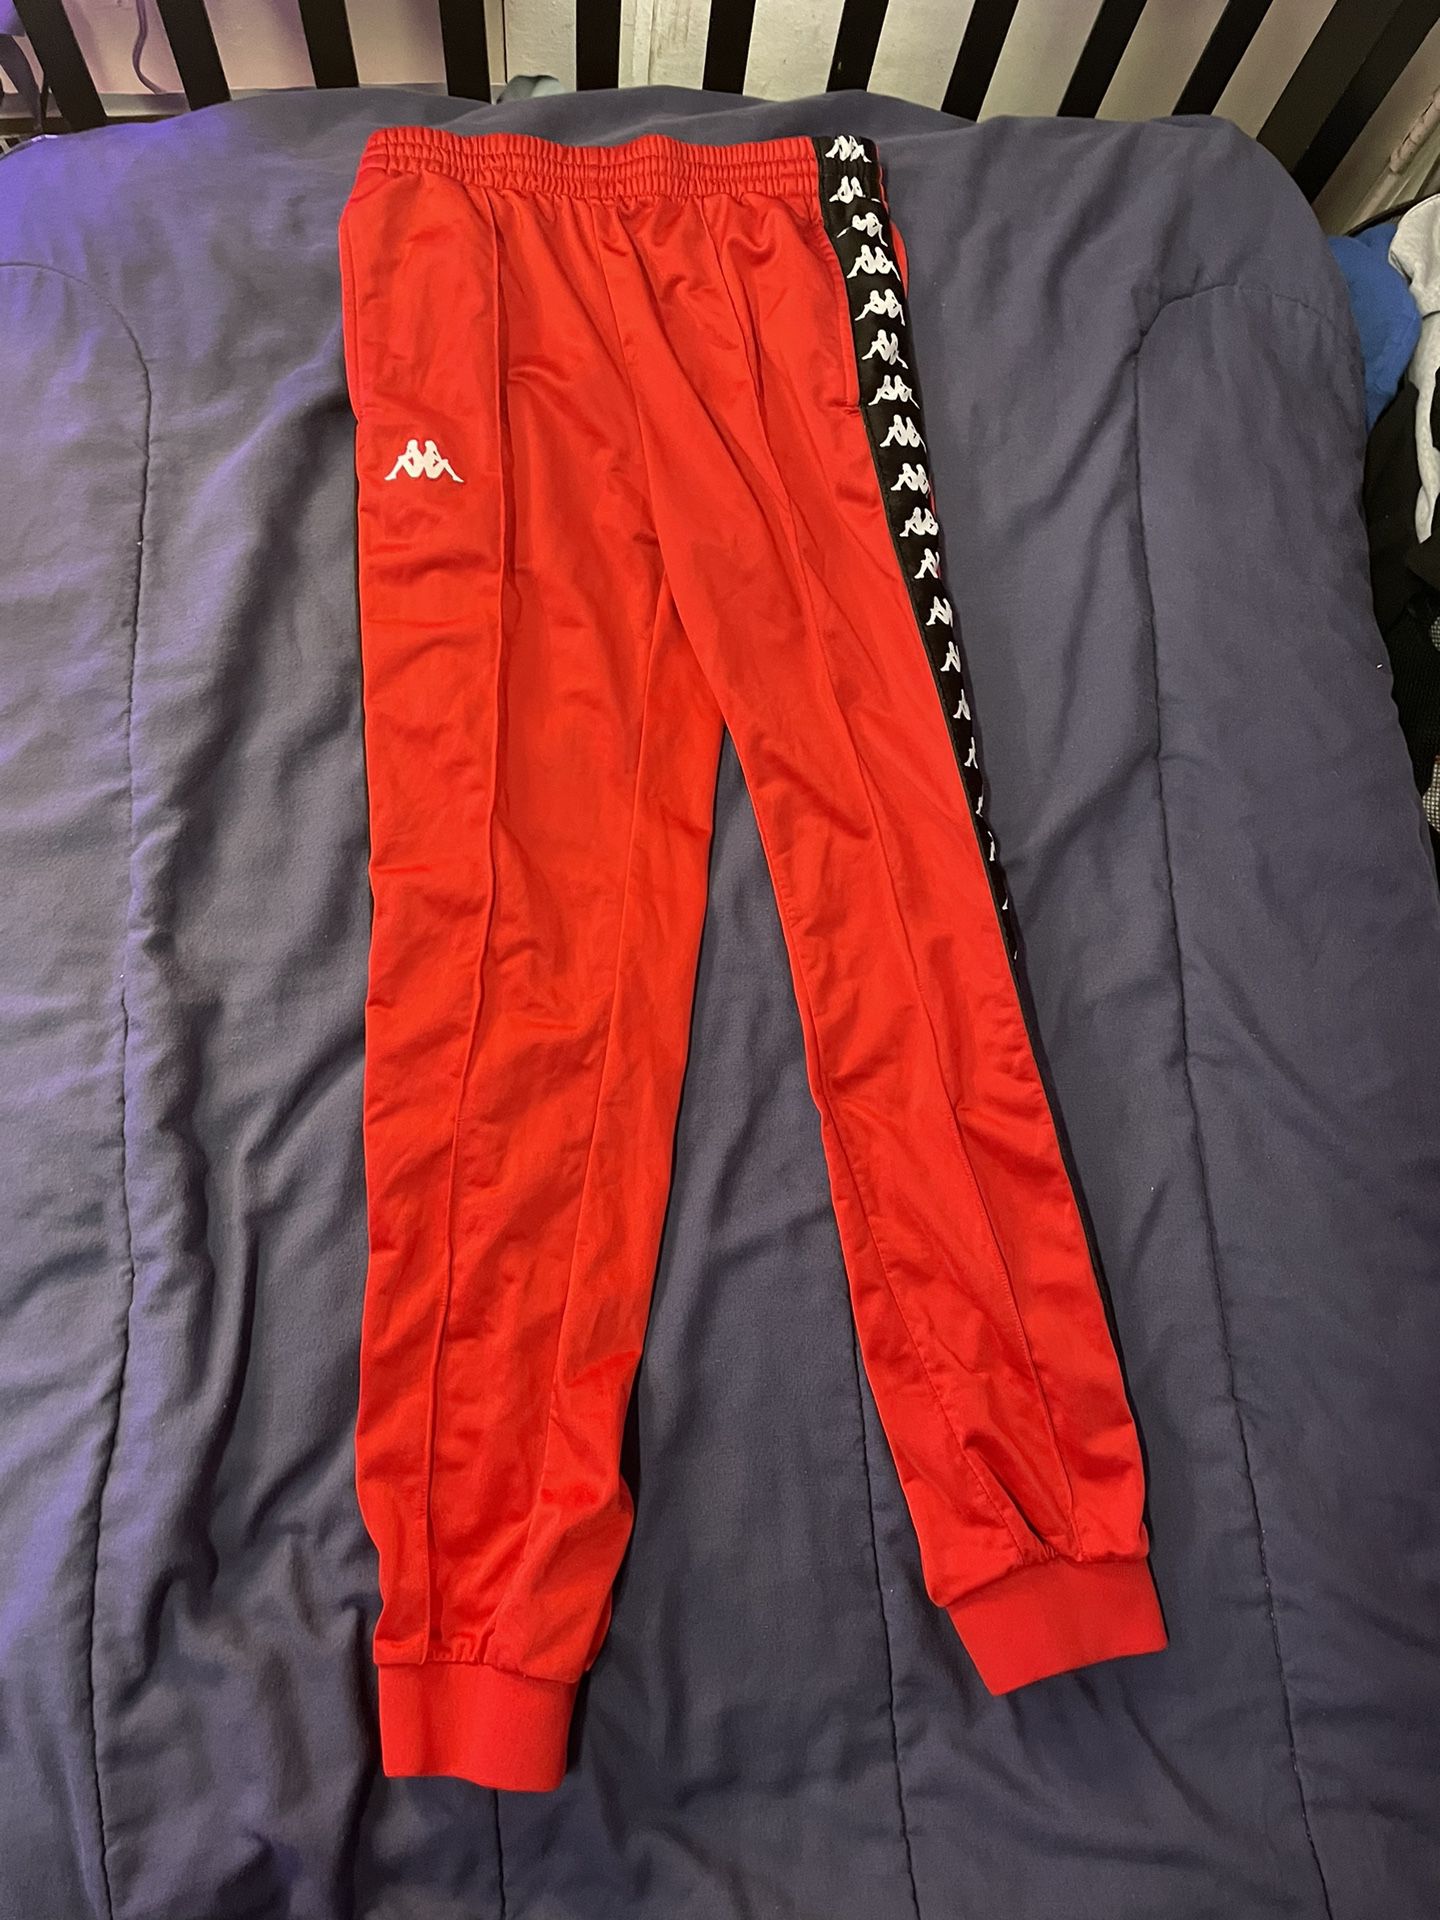 Revival sindsyg leje Red Kappa Track Pants Size Medium for Sale in Daly City, CA - OfferUp